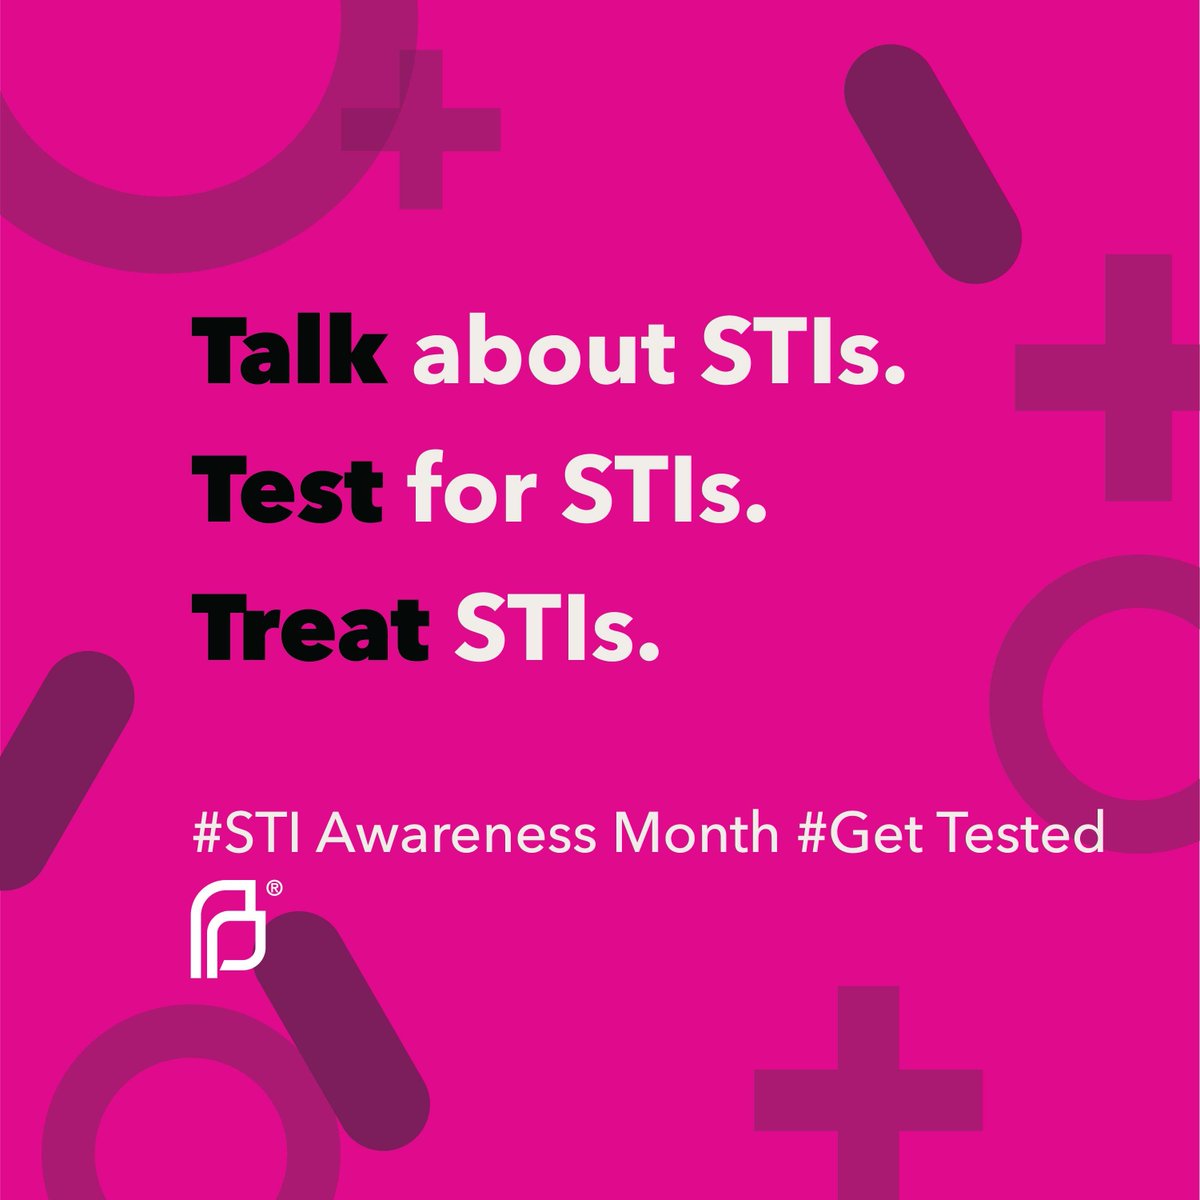 Sexually transmitted infections (STIs) are really common, and they don’t define who you are. STI testing is a regular part of being responsible and taking care of yourself. Make an appointment at ppnne.org #STIAwarenessMonth #GetTested